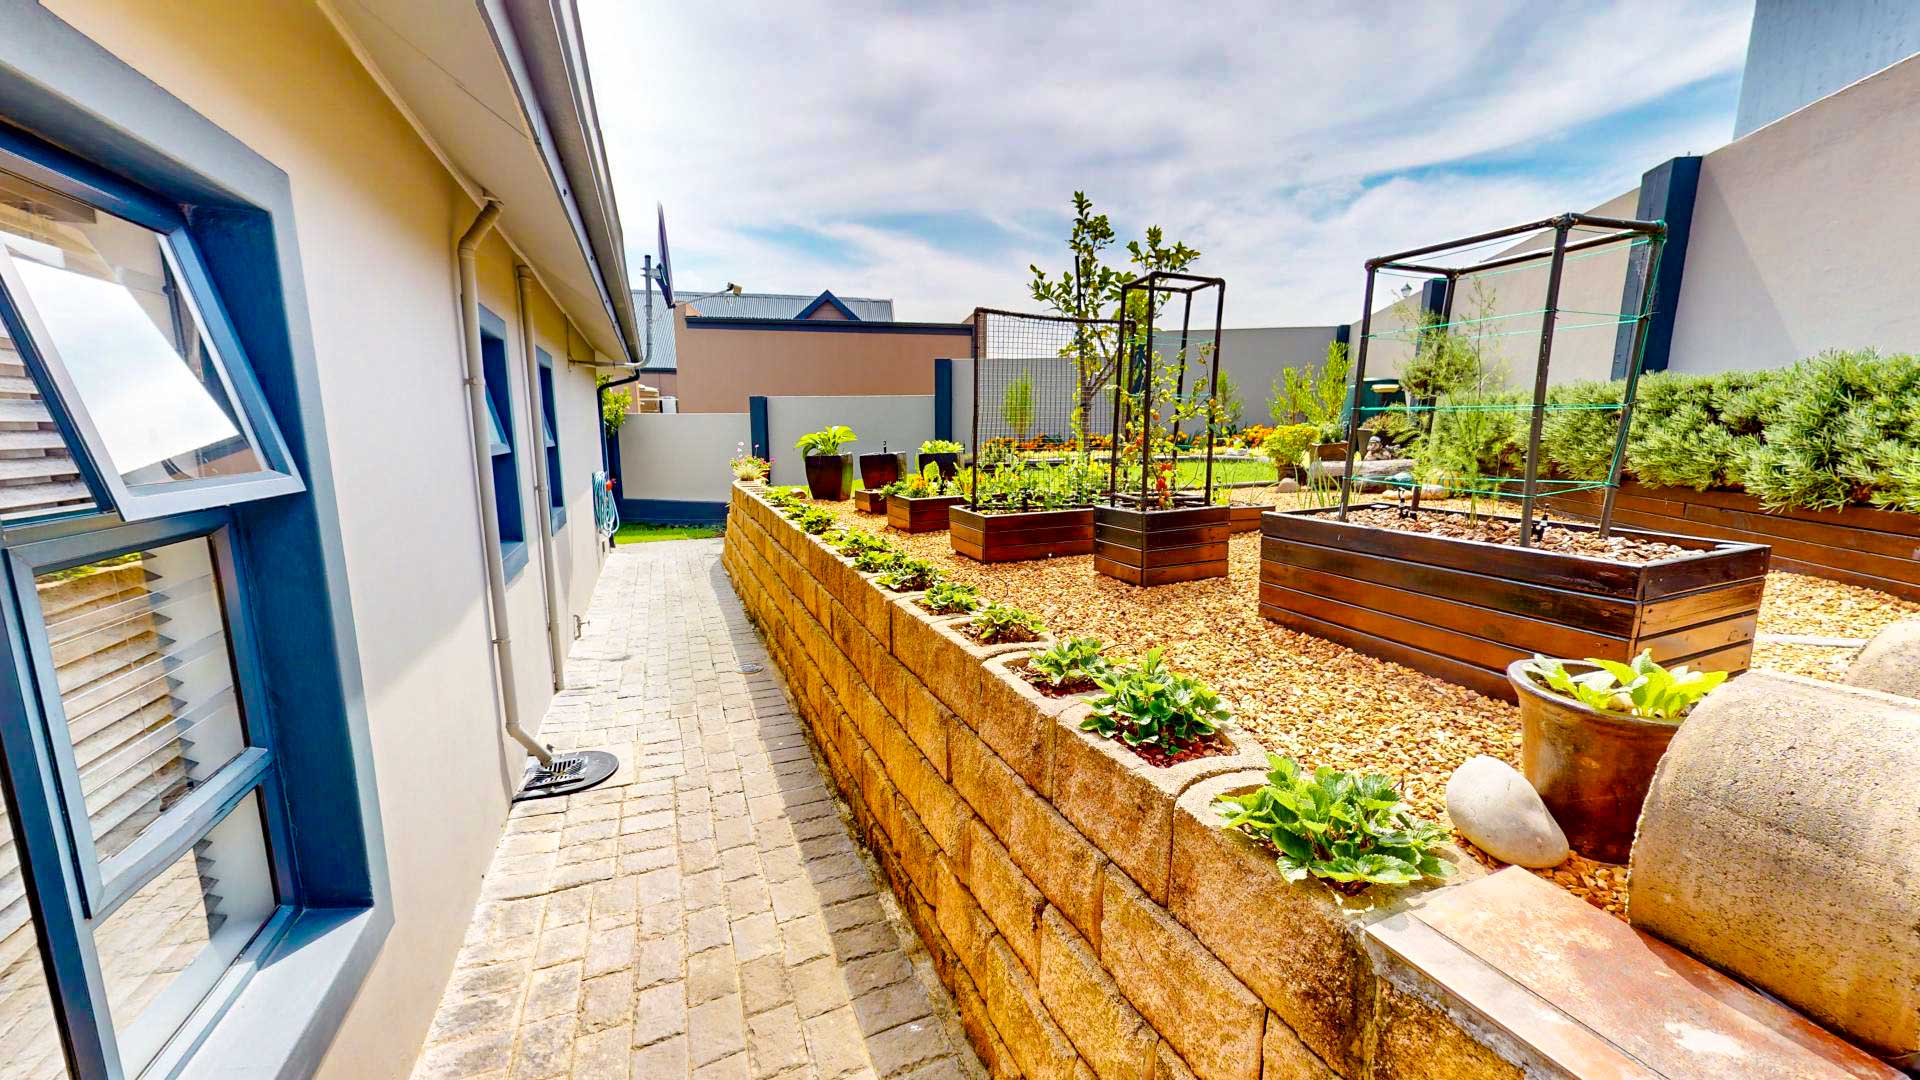 3 Bedroom Property for Sale in Blue Mountain Village Western Cape